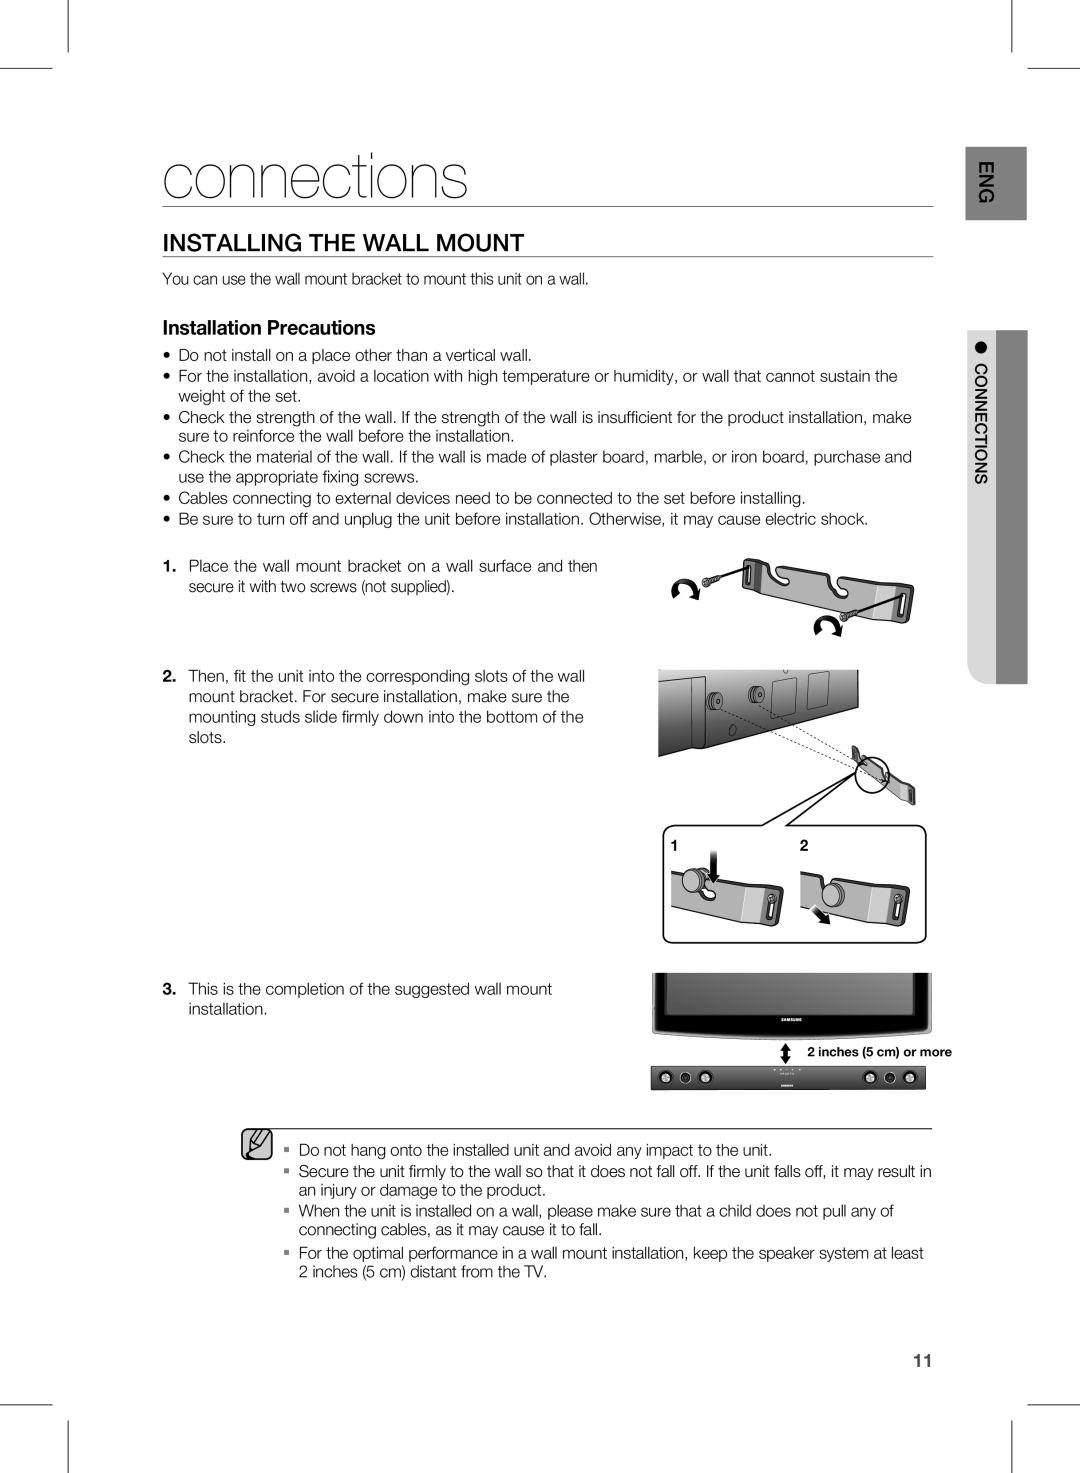 Samsung HW-D550, HW-D551 user manual connections, INSTAllING THE WAll MOUNT, Installation Precautions 